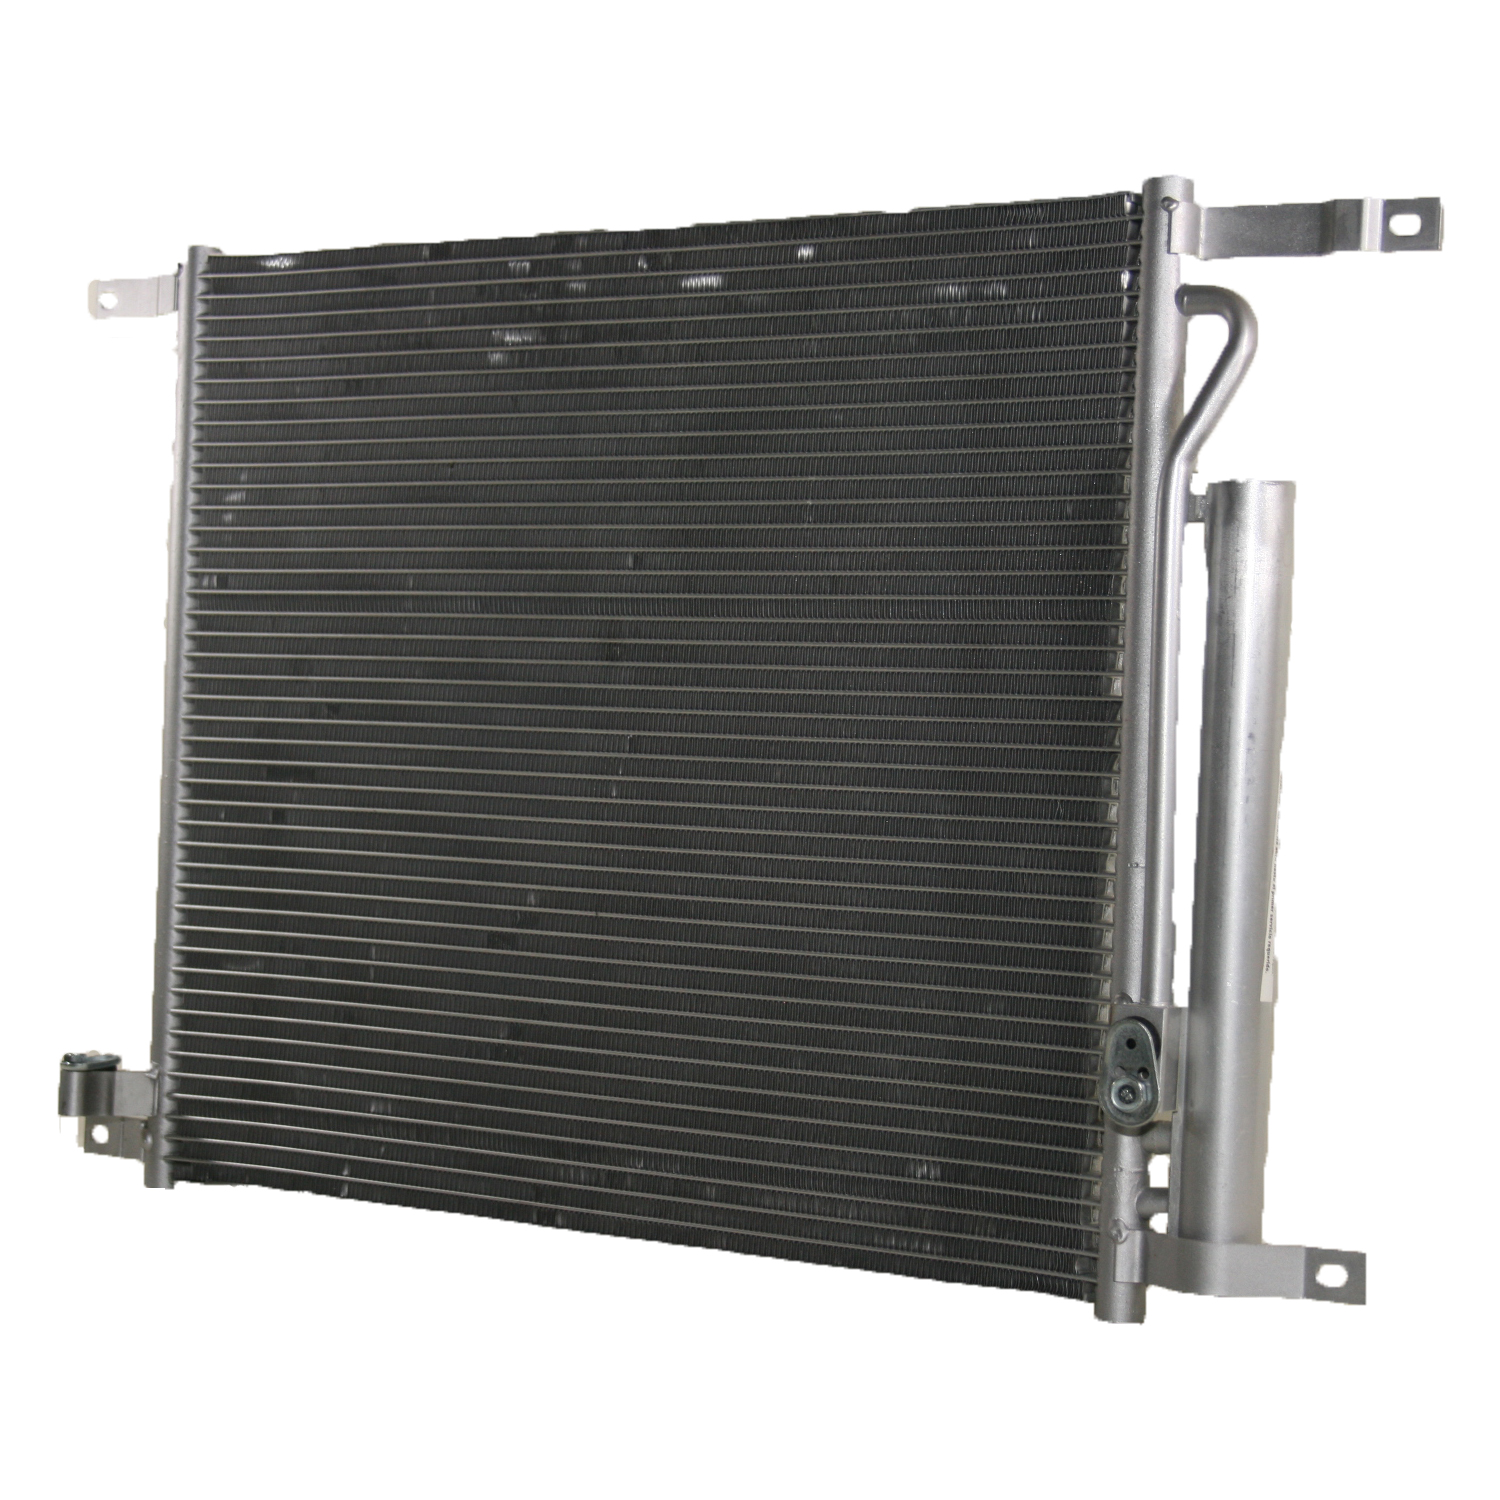 TCW Condenser 44-5029 New Product Image field_60b6a13a6e67c